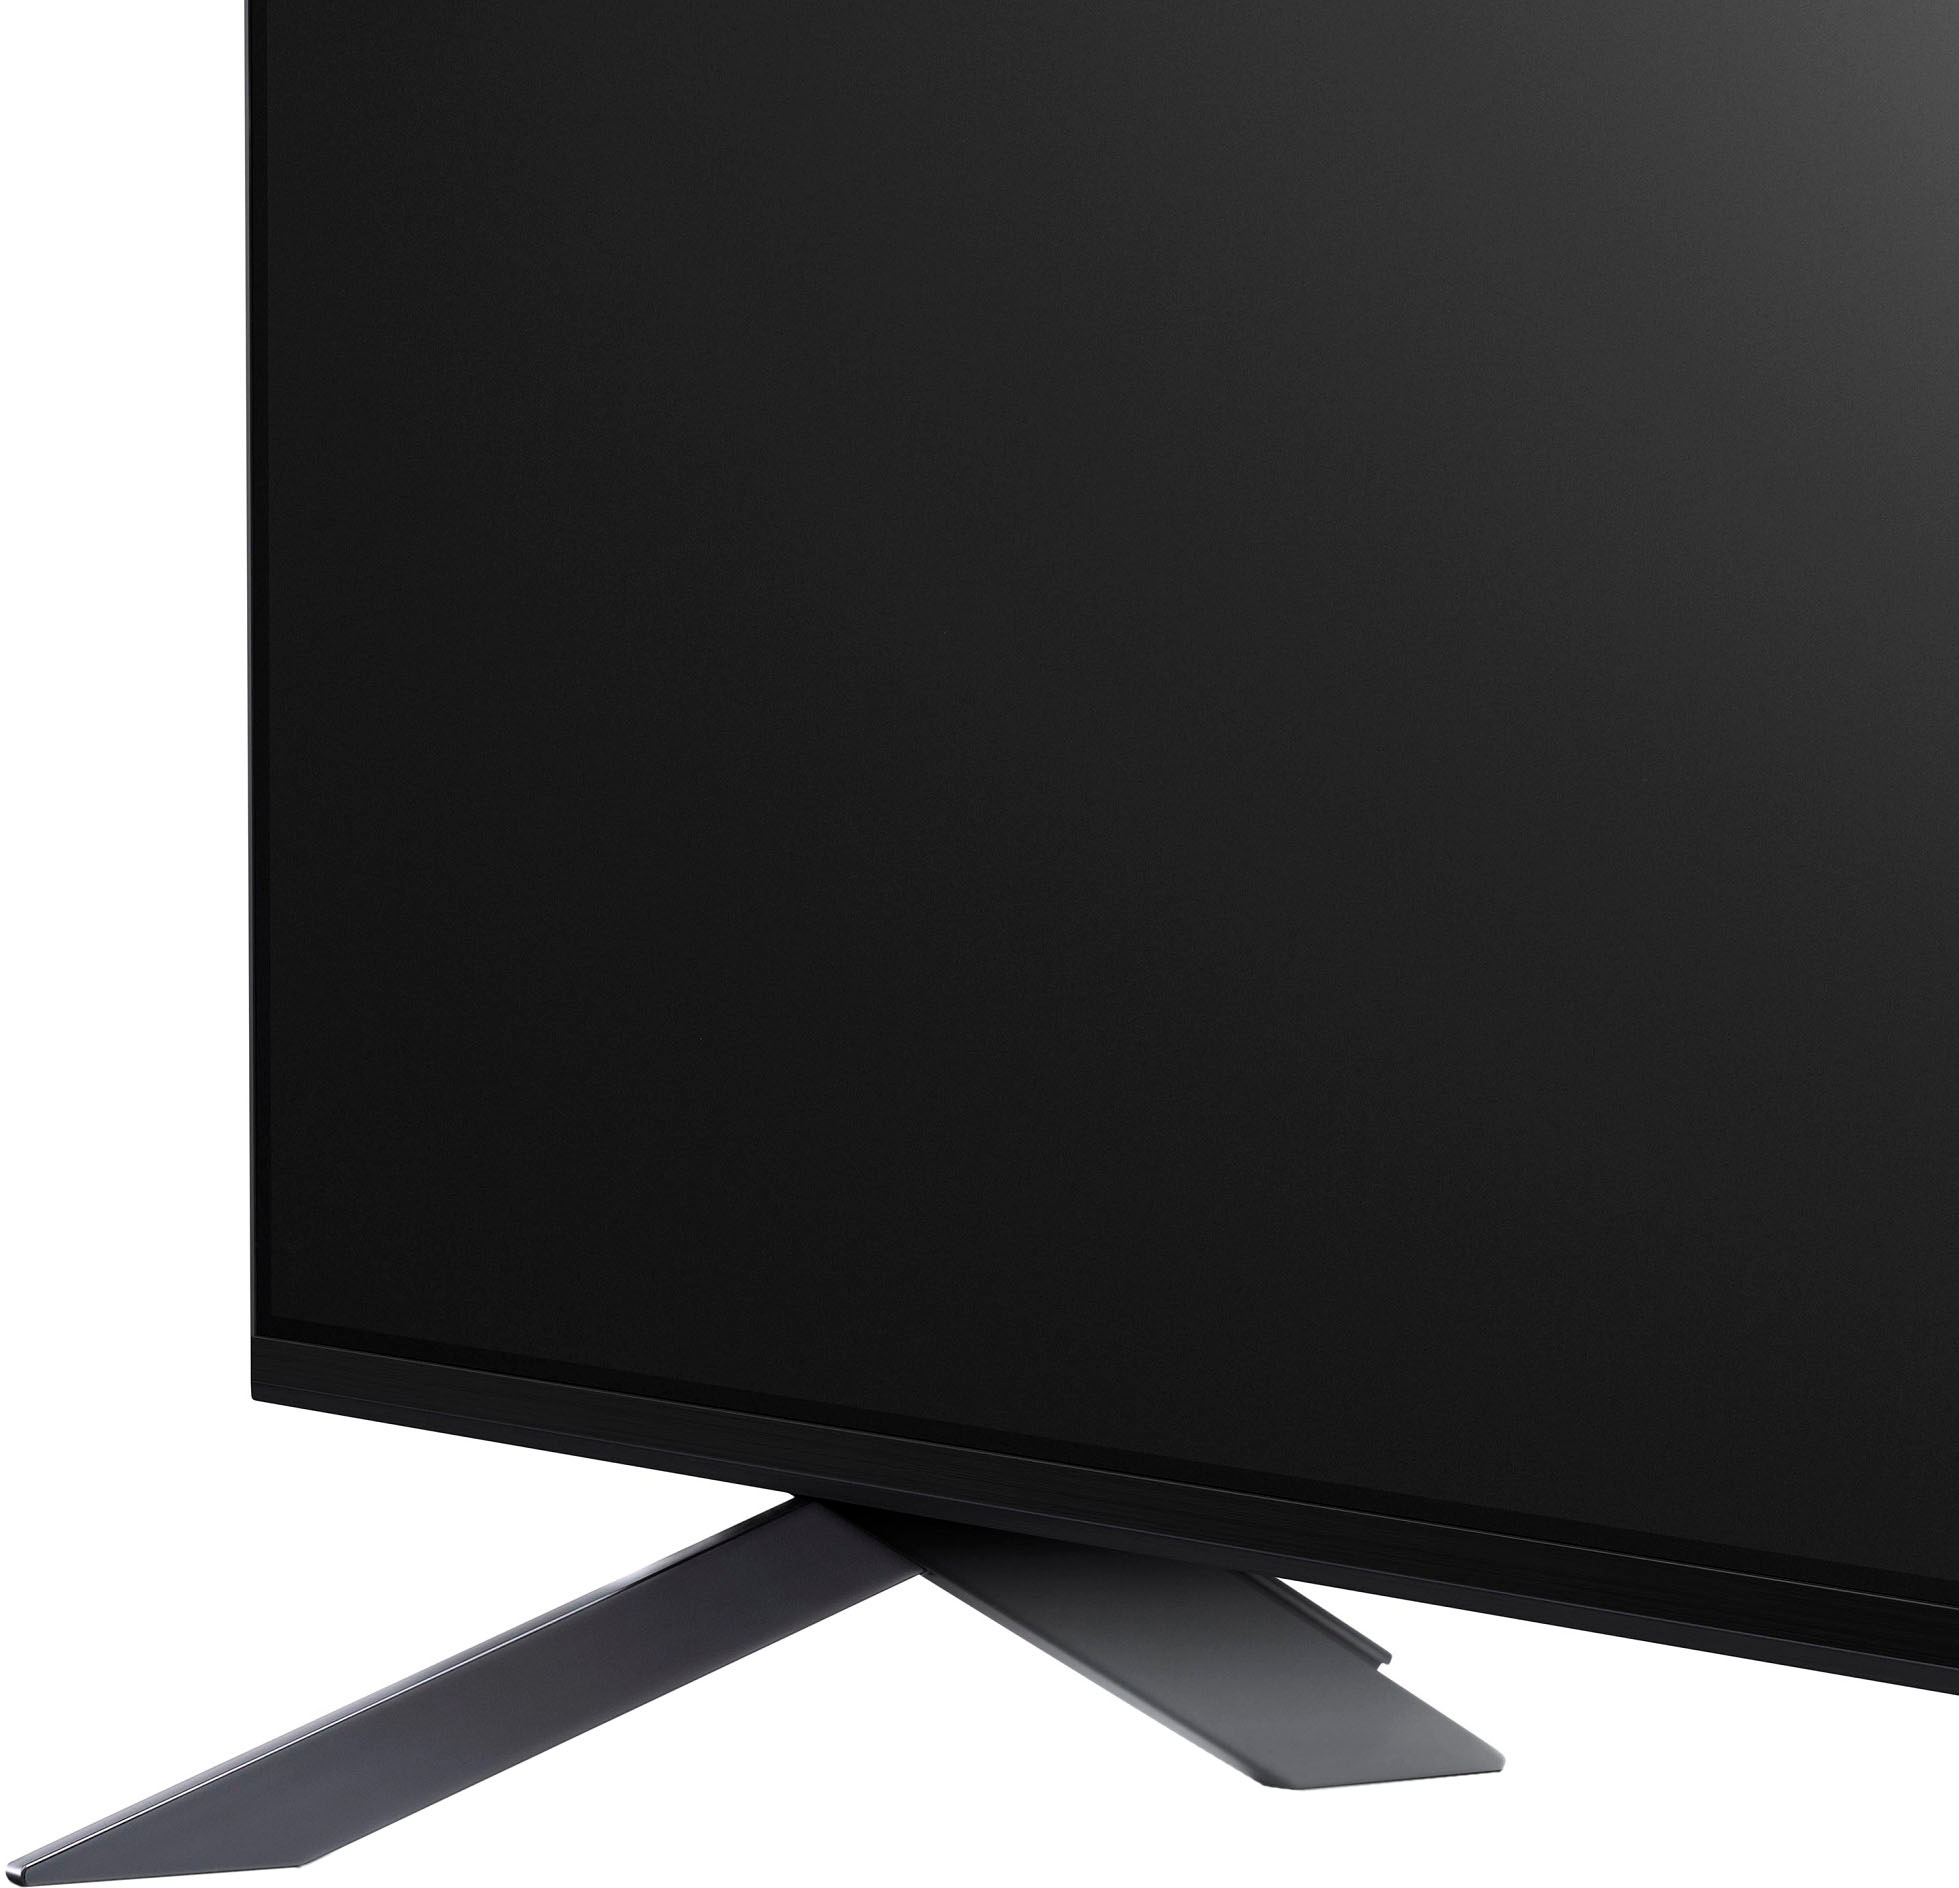  LG QNED75 Series 75-Inch Class QNED Mini-LED Smart TV  75QNED75URA, 2023 - AI-Powered 4K TV, Alexa Built-in, Ashed Blue :  Electronics